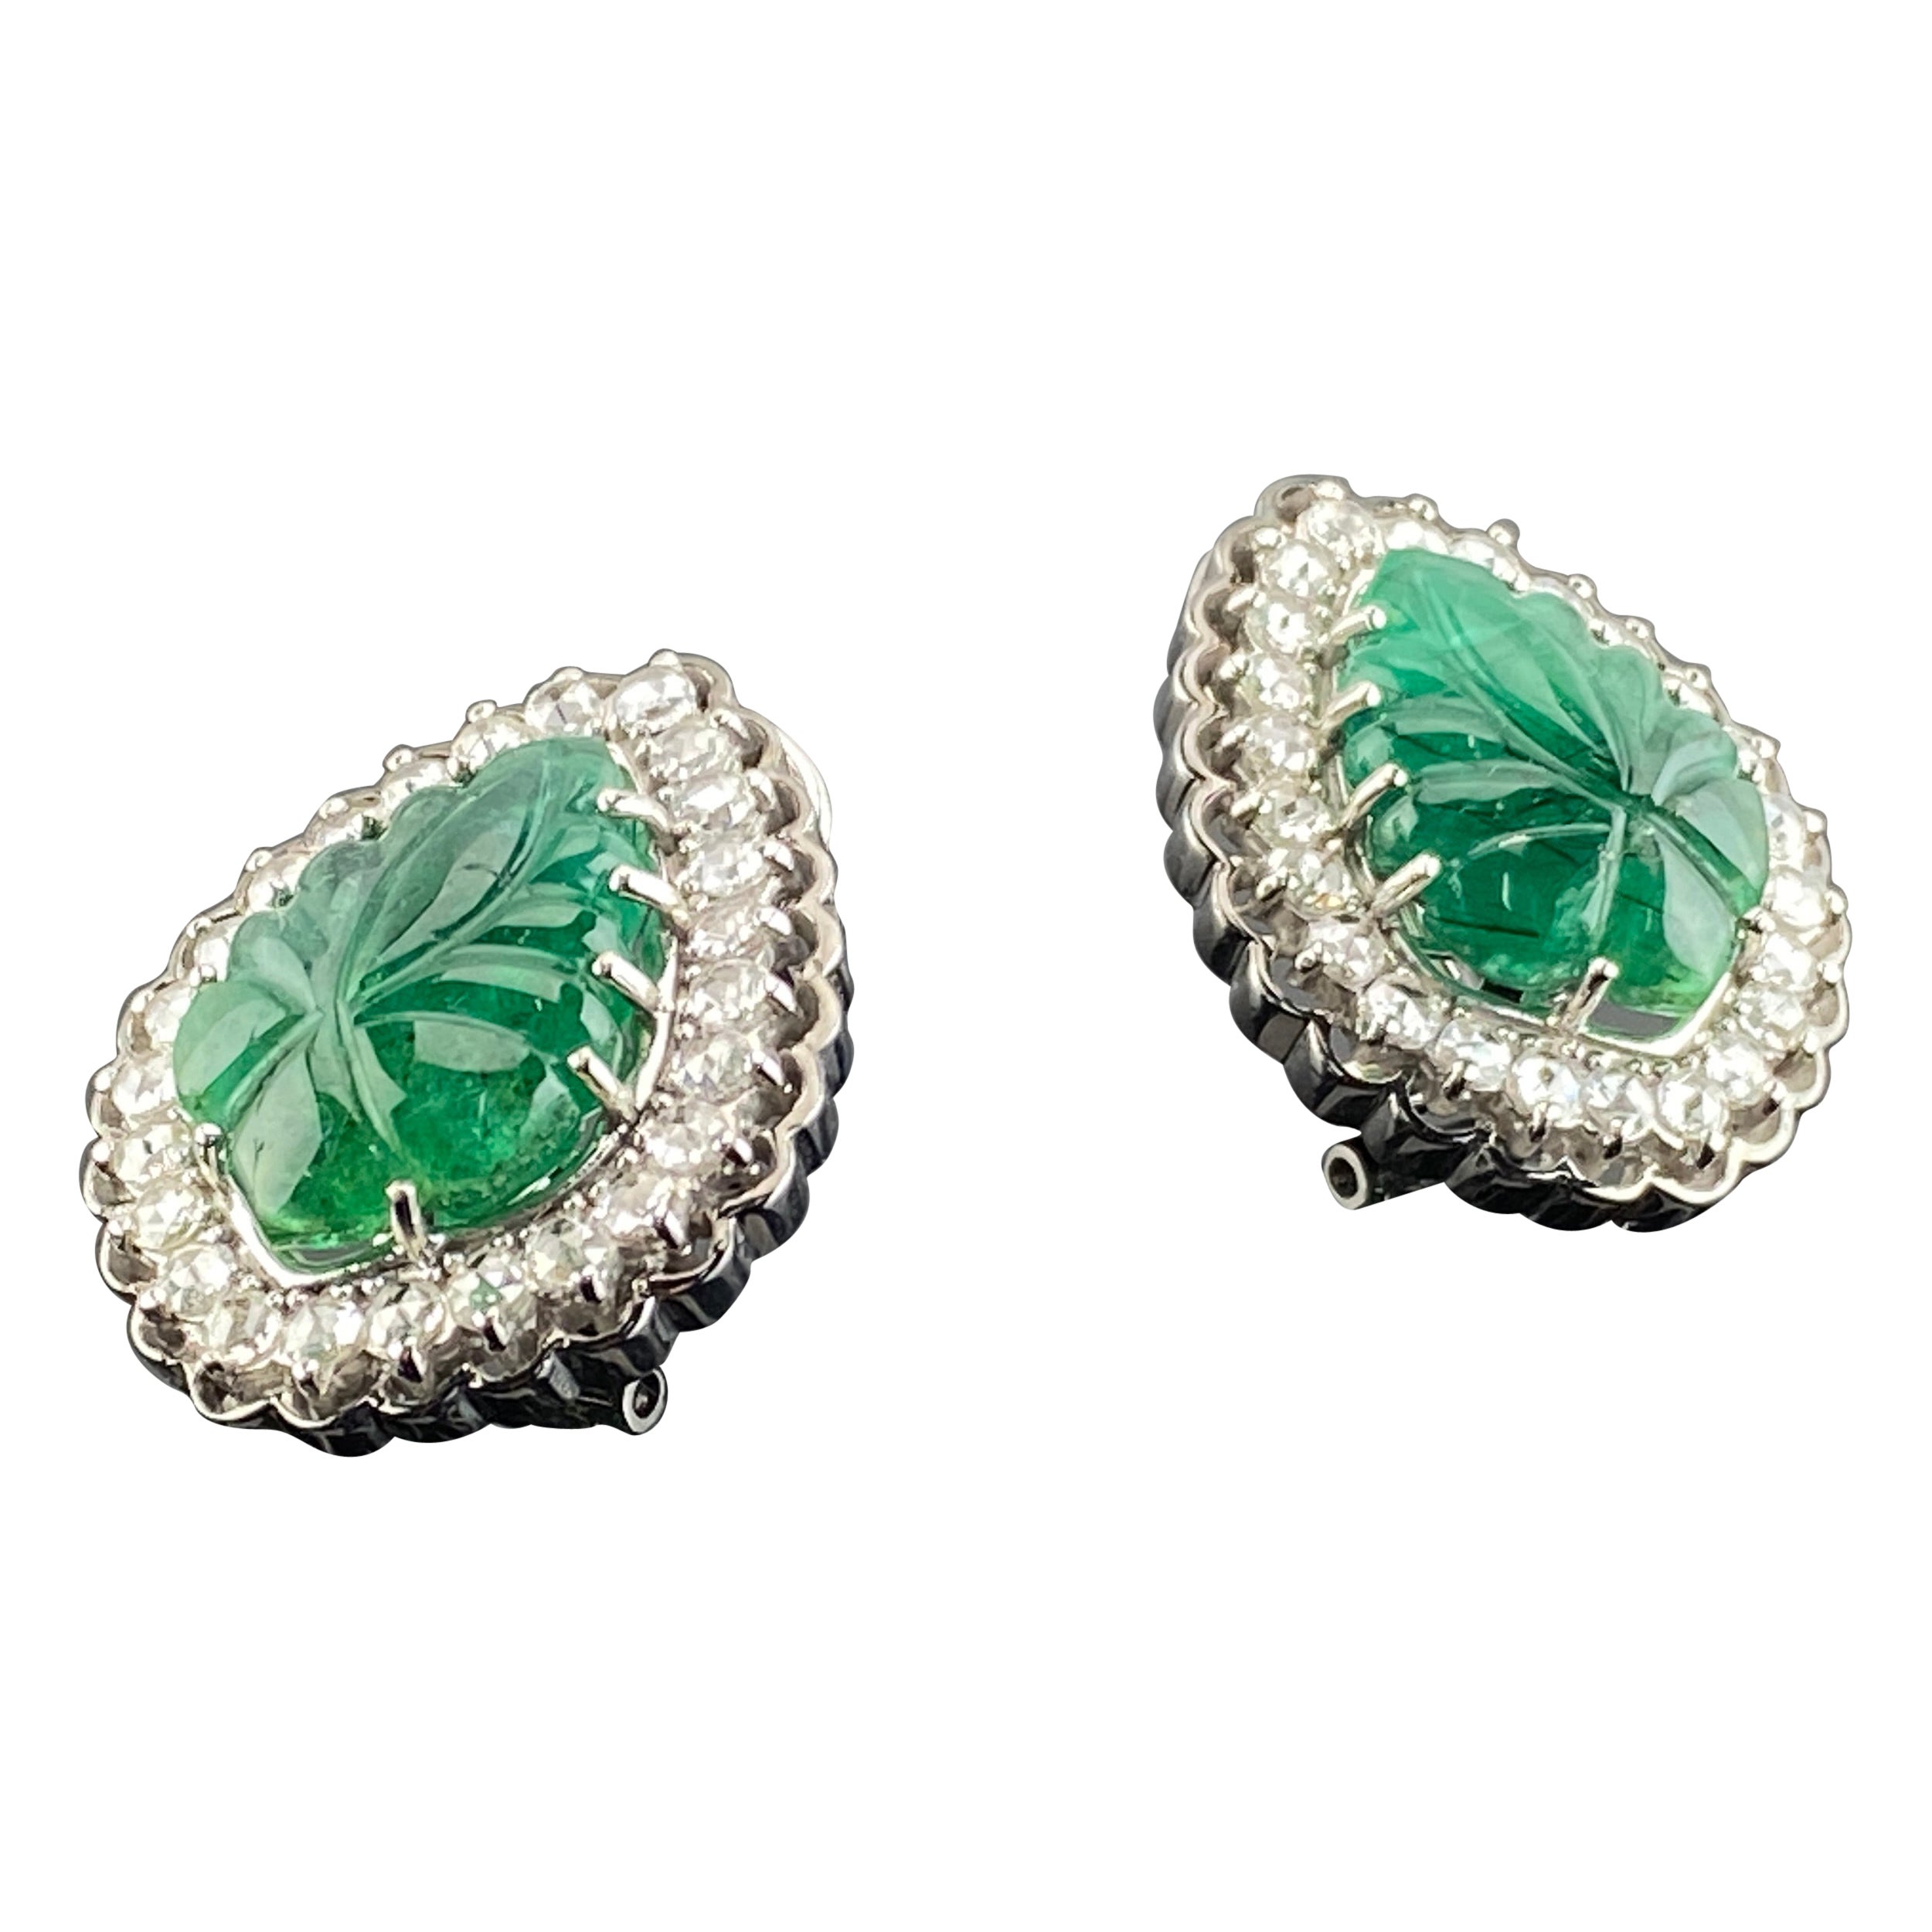 Certified Art Deco Style Natural Emerald Leafs Carved Earrings Set in 18K Gold